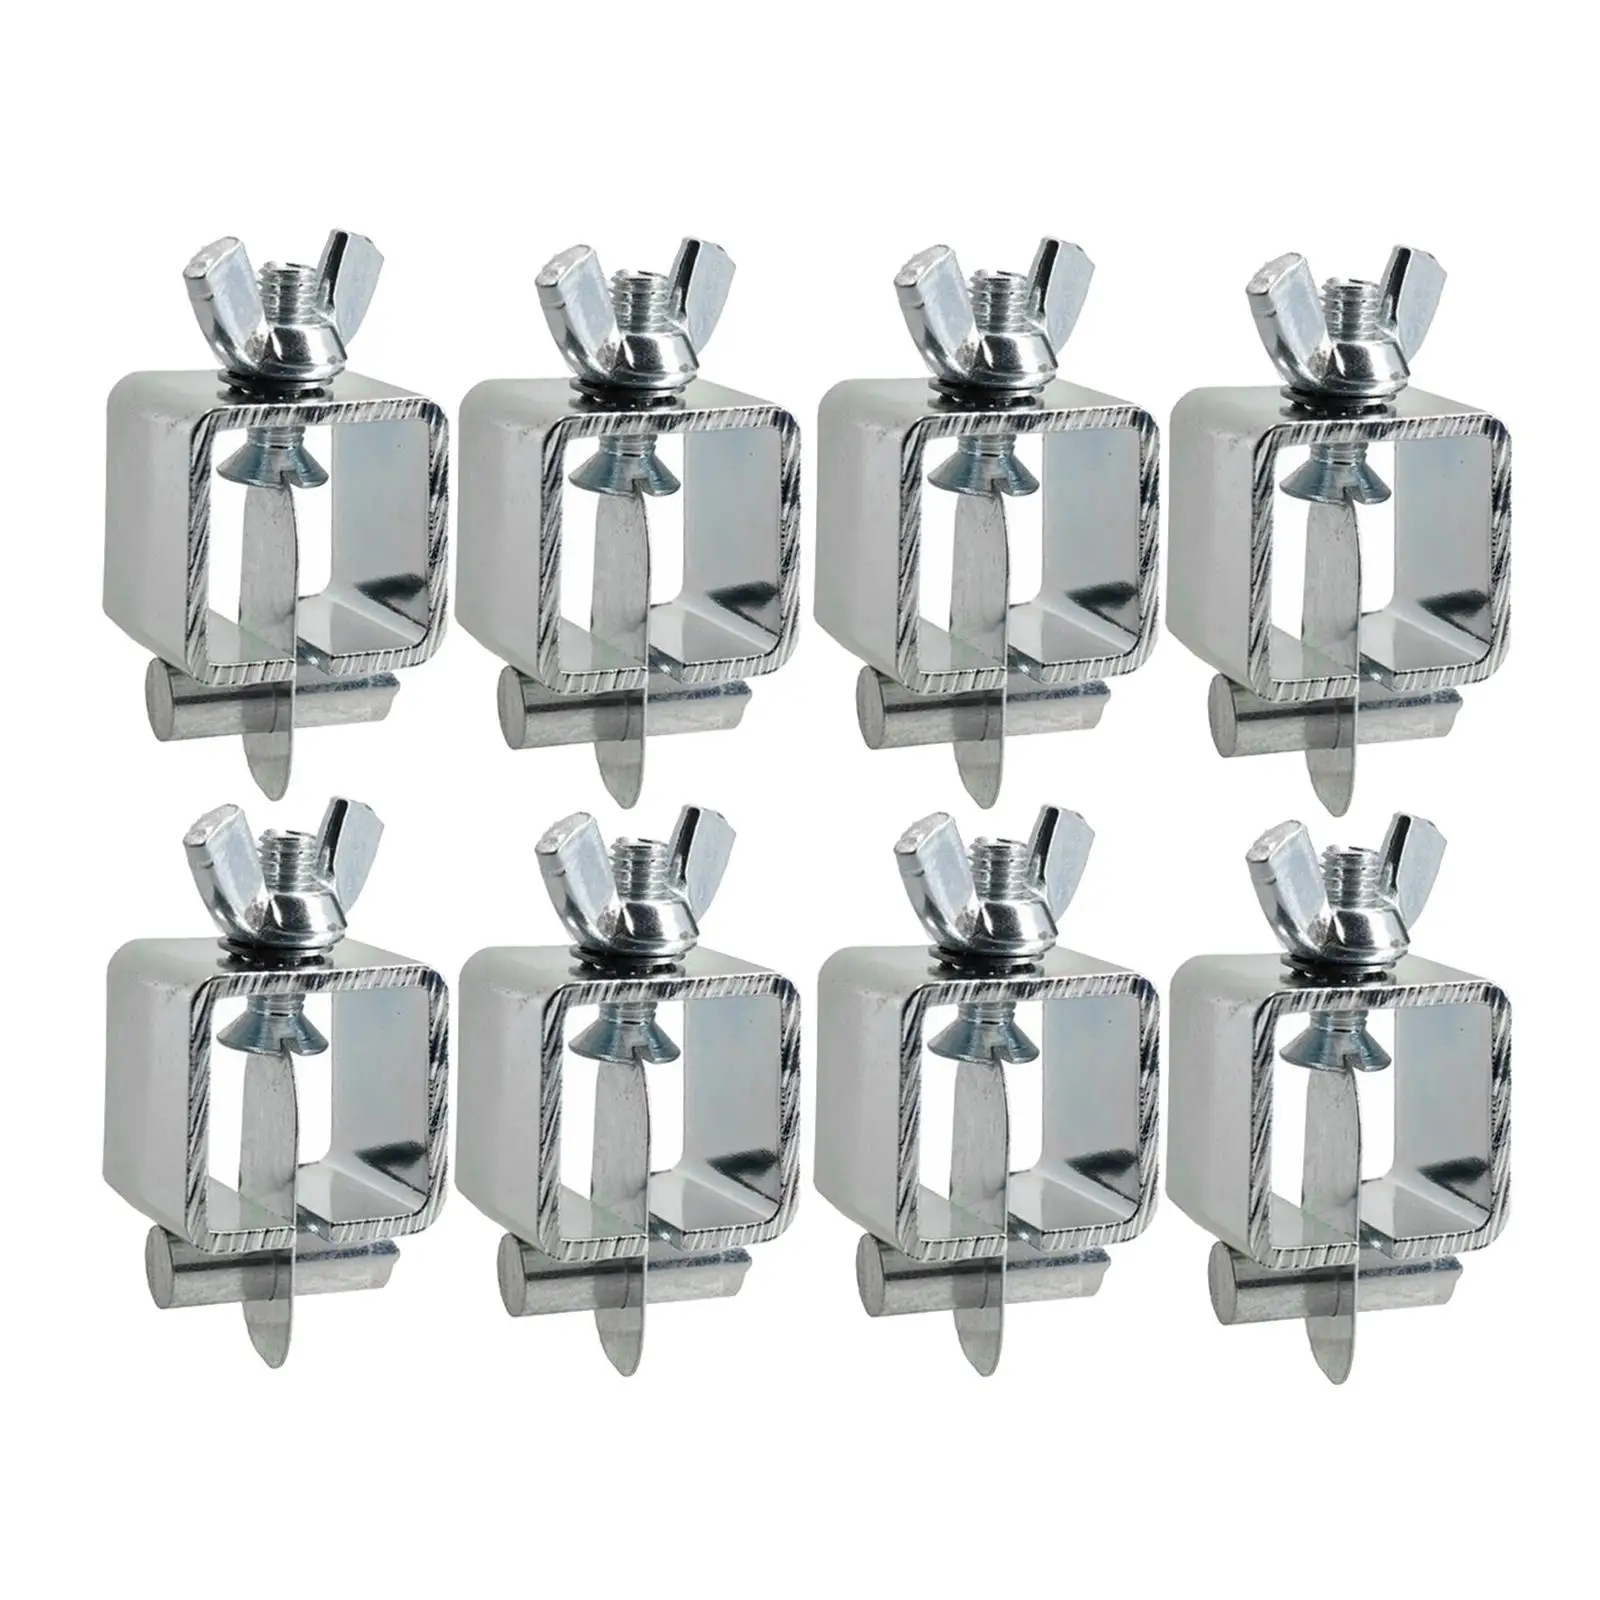 8x Metal Holding Welding Clamps Butt Weld Clamps Clips Holder Panel Sheet